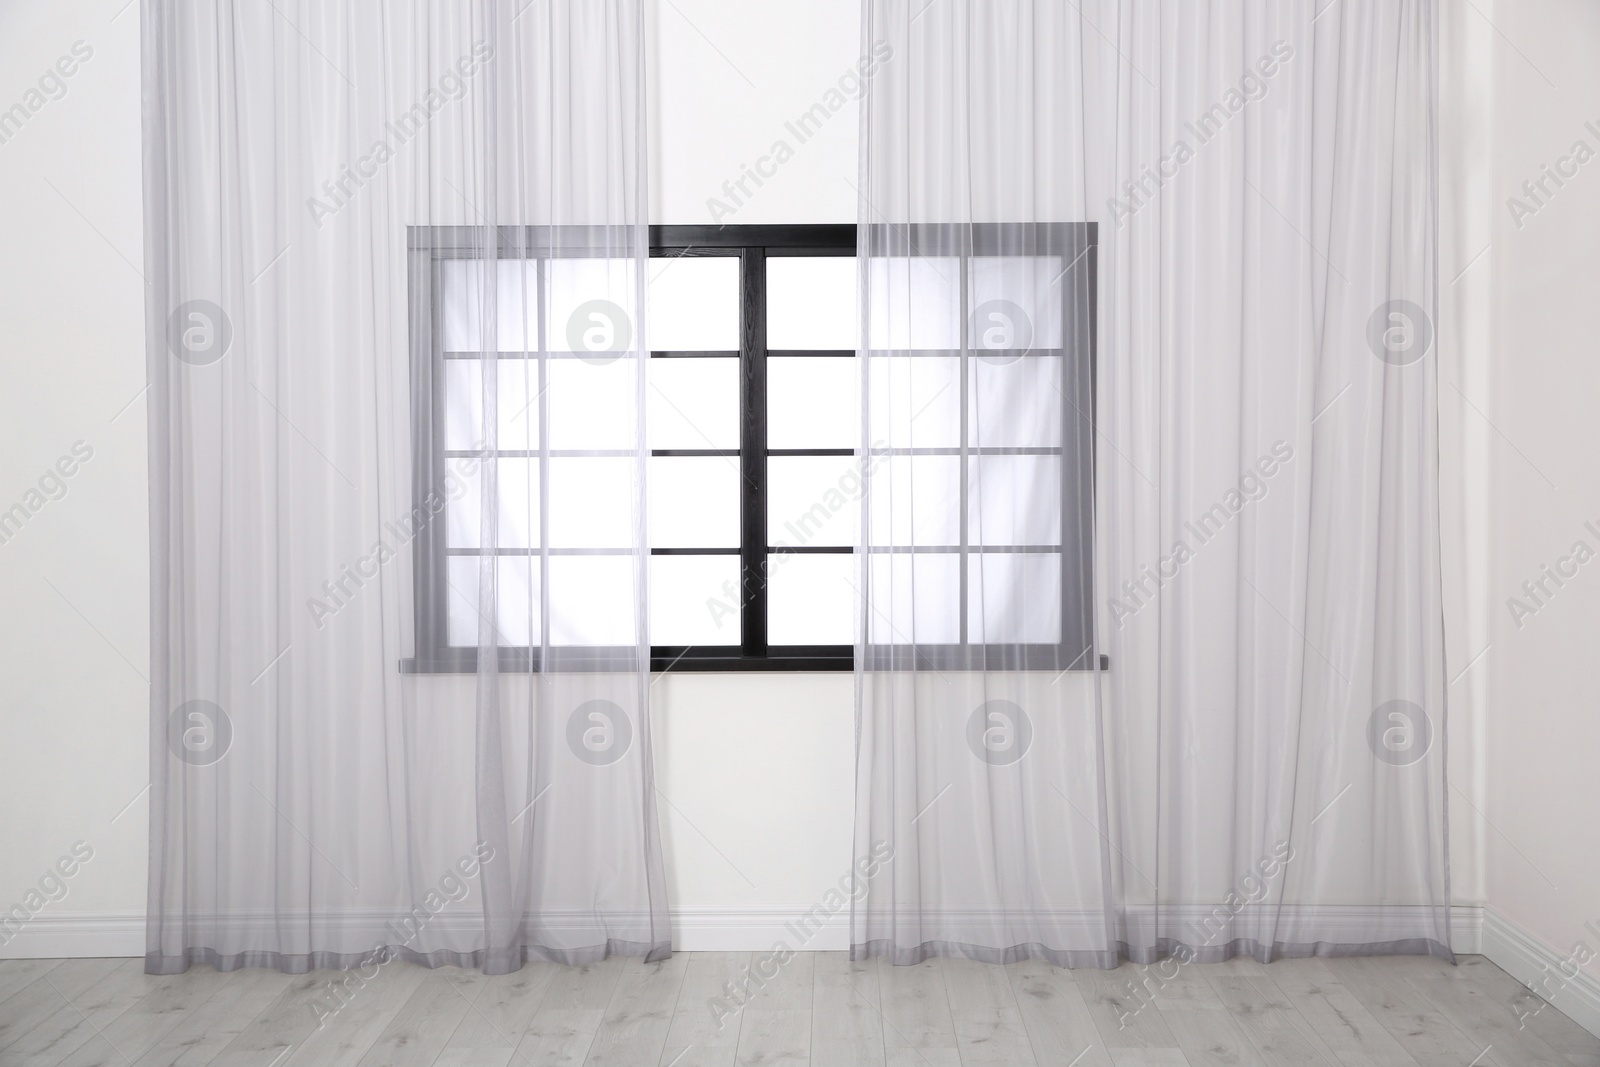 Photo of Modern window with glass and curtains in room. Home interior